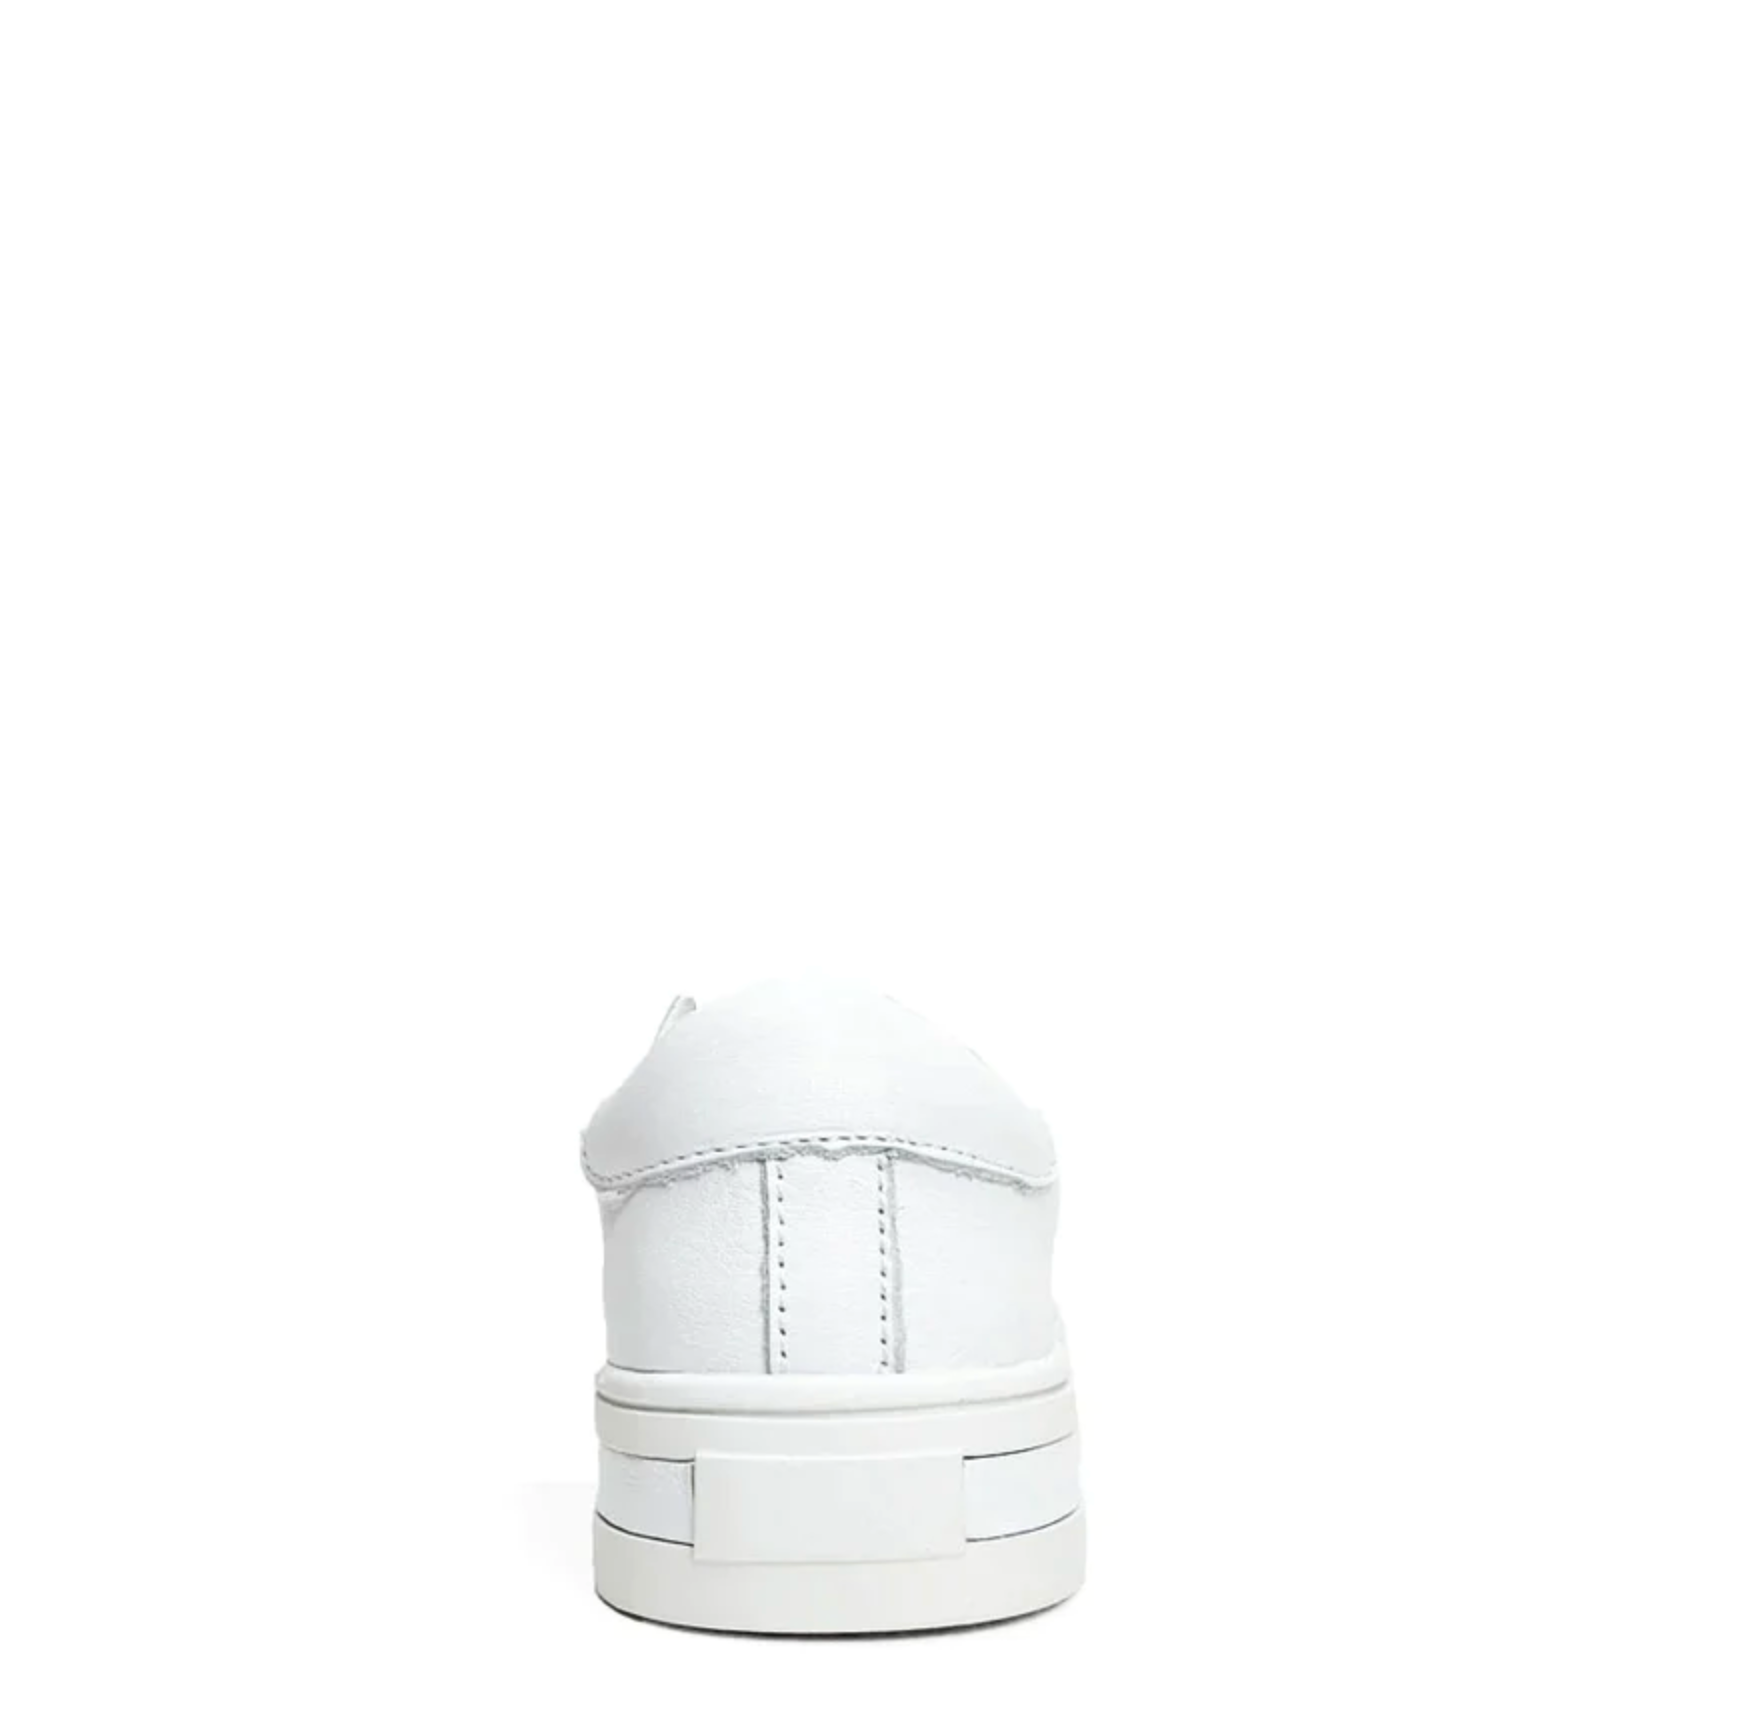 ALFIE &amp; EVIE PARADISE WHITE Women Sneakers - Zeke Collection